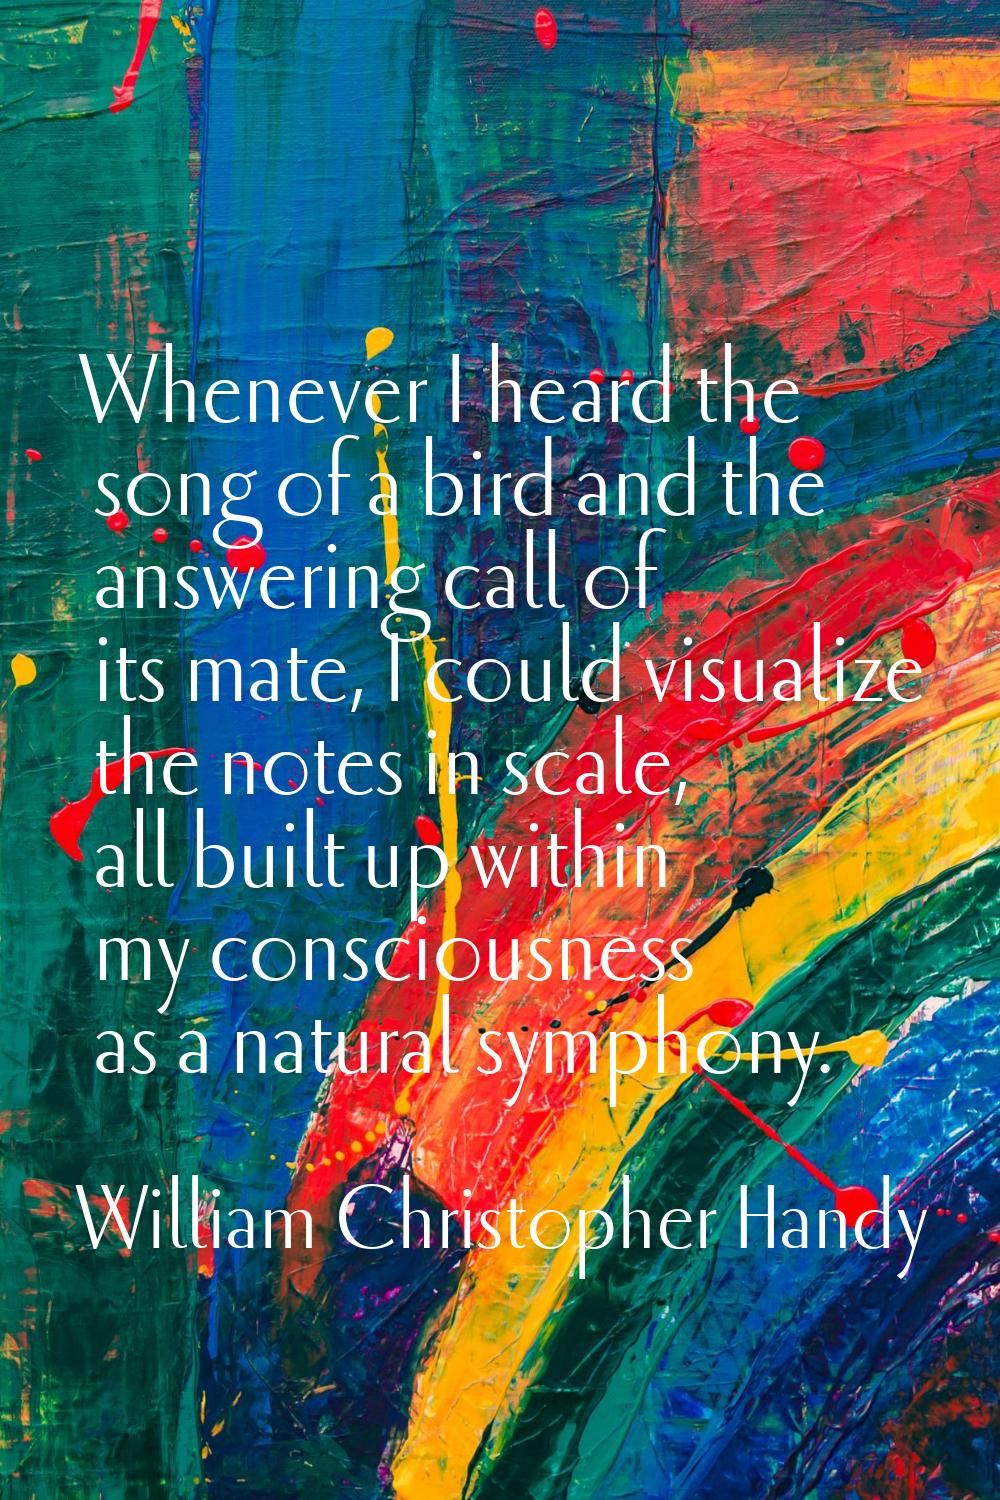 Whenever I heard the song of a bird and the answering call of its mate, I could visualize the notes